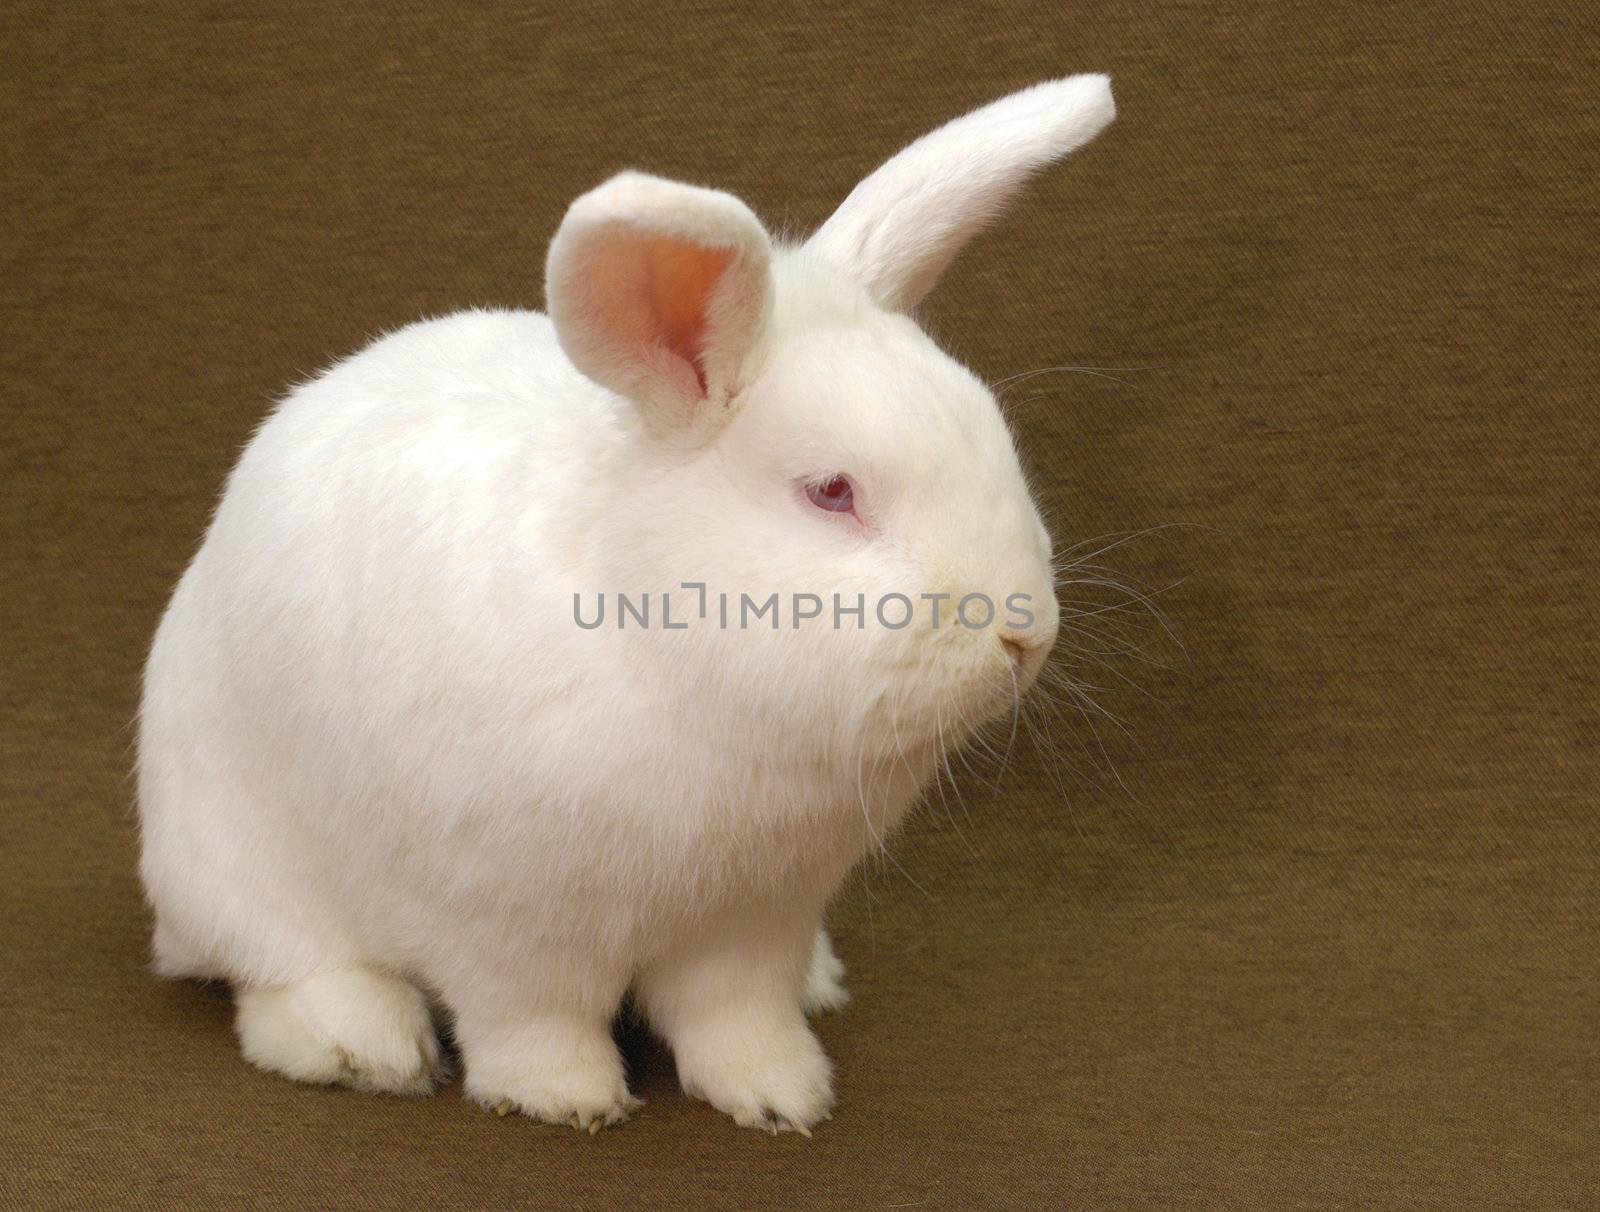 A large New Zealand White rabbit (albinoa) on a plain brown background.